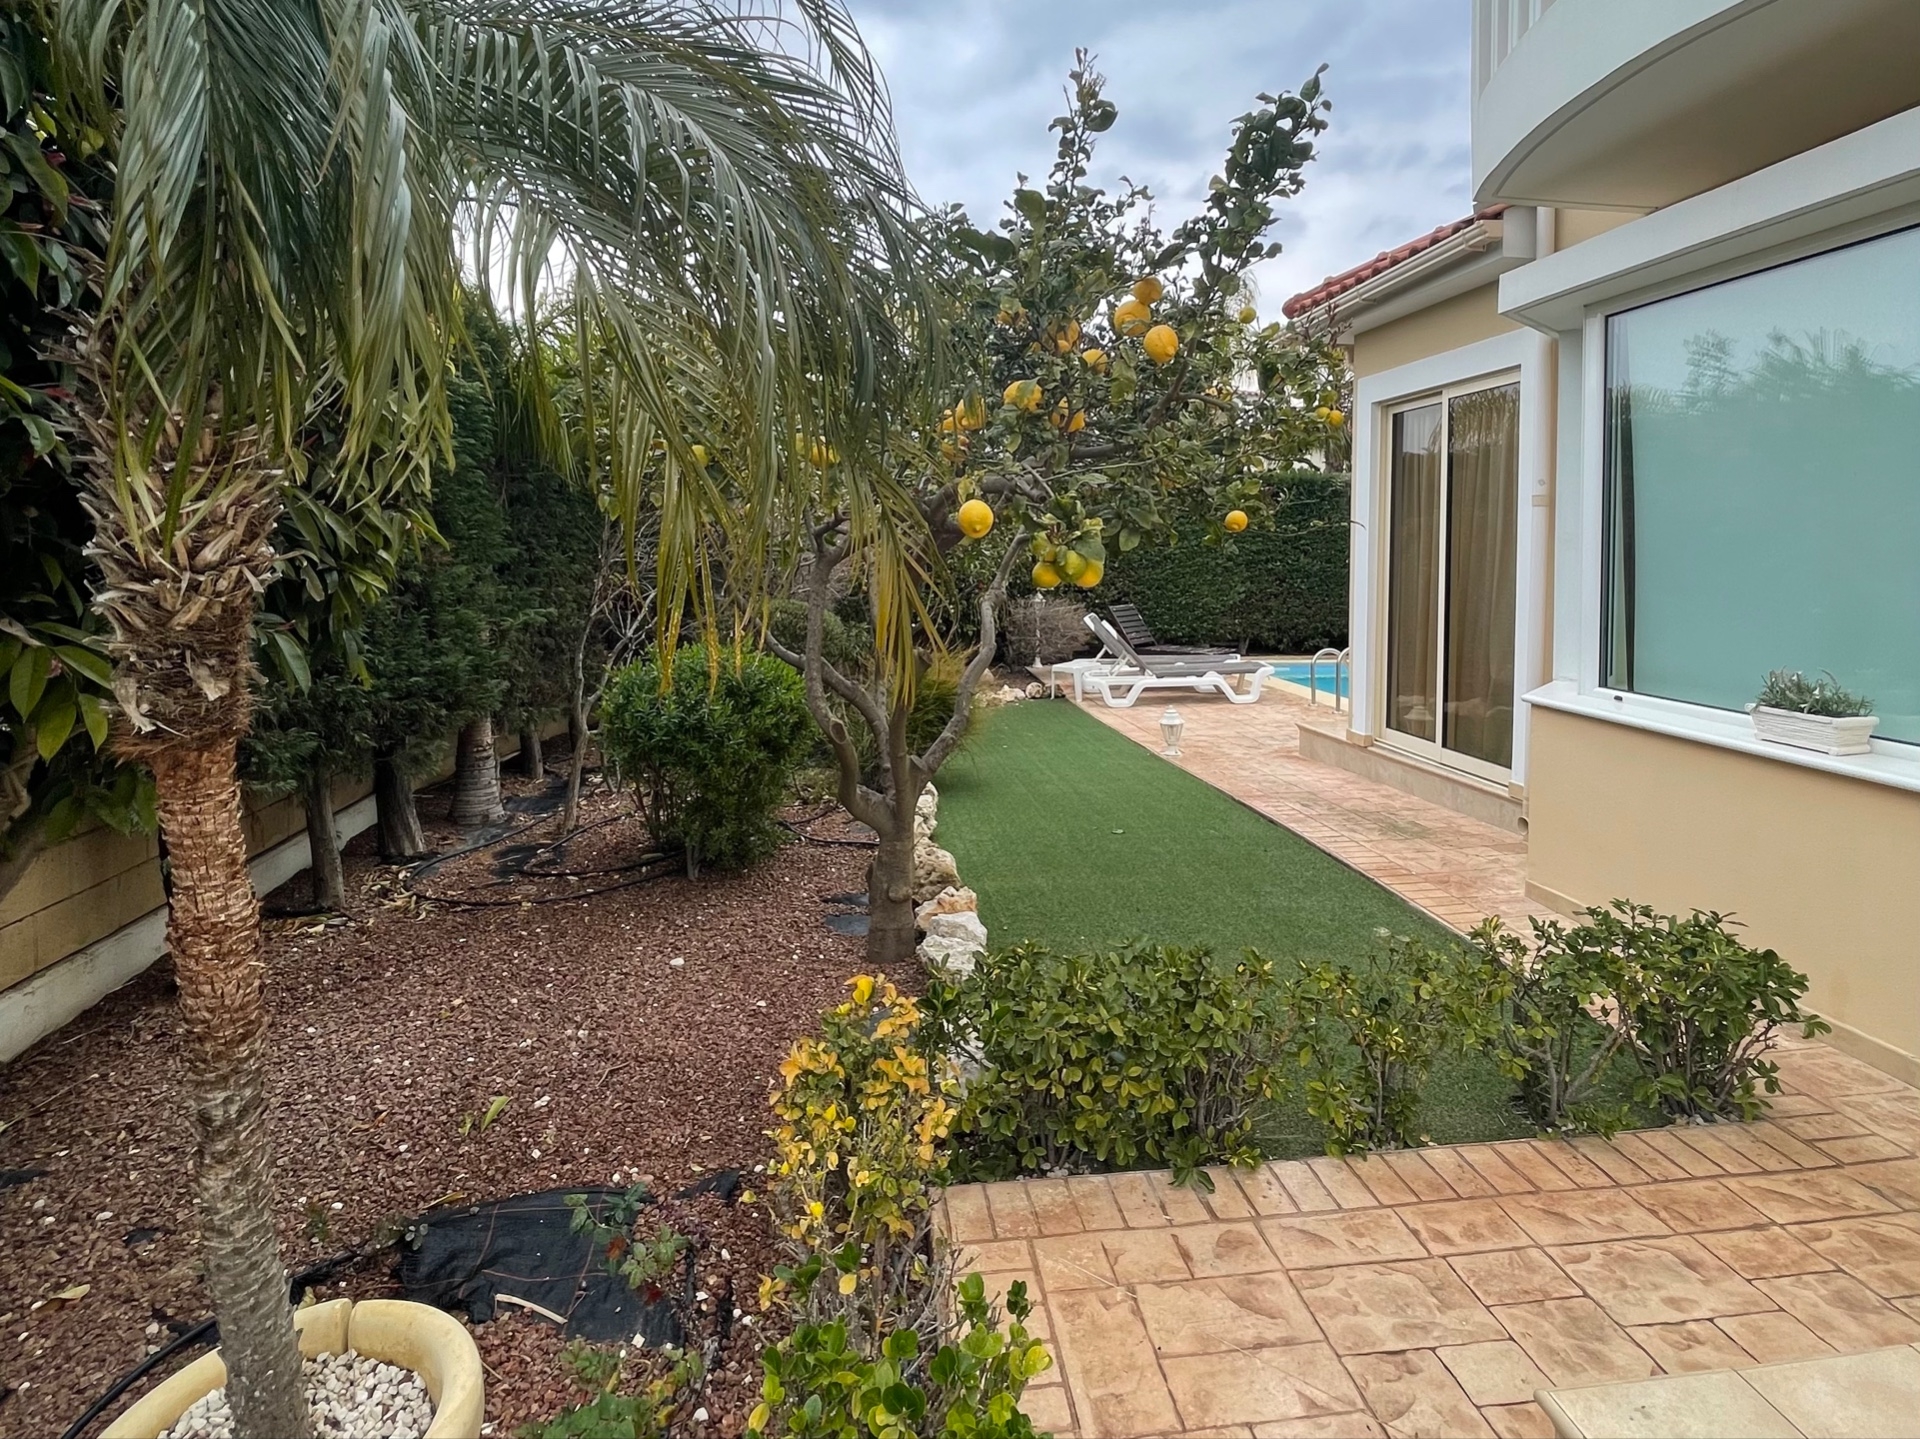 4 Bedroom House for Sale in Larnaca District